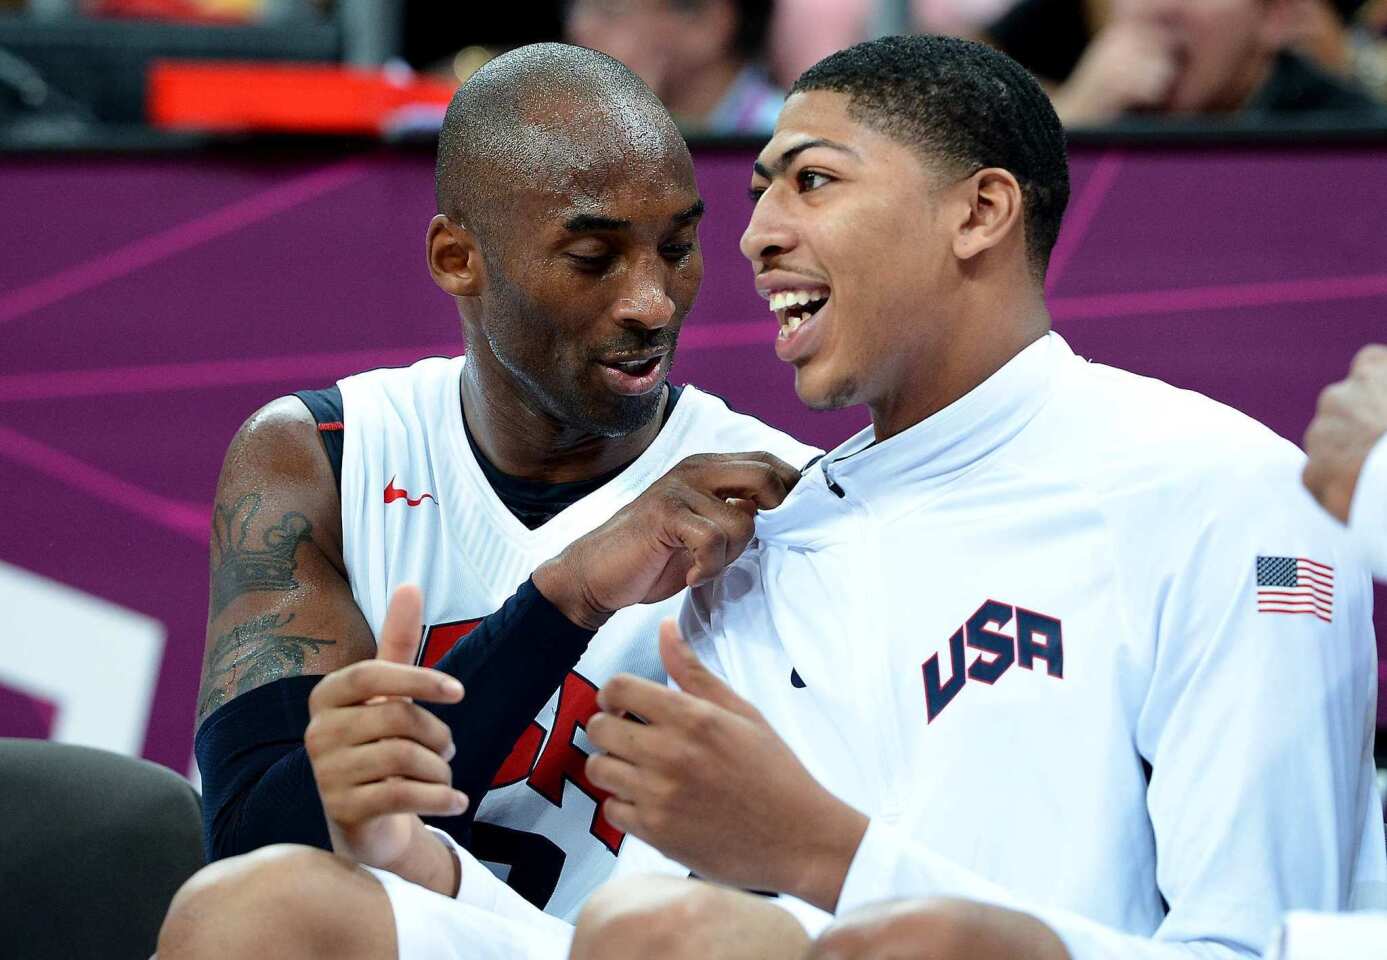 Kobe Bryant, left, and Anthony Davis chat on the bench during the U.S. basketball victory over Nigeria.